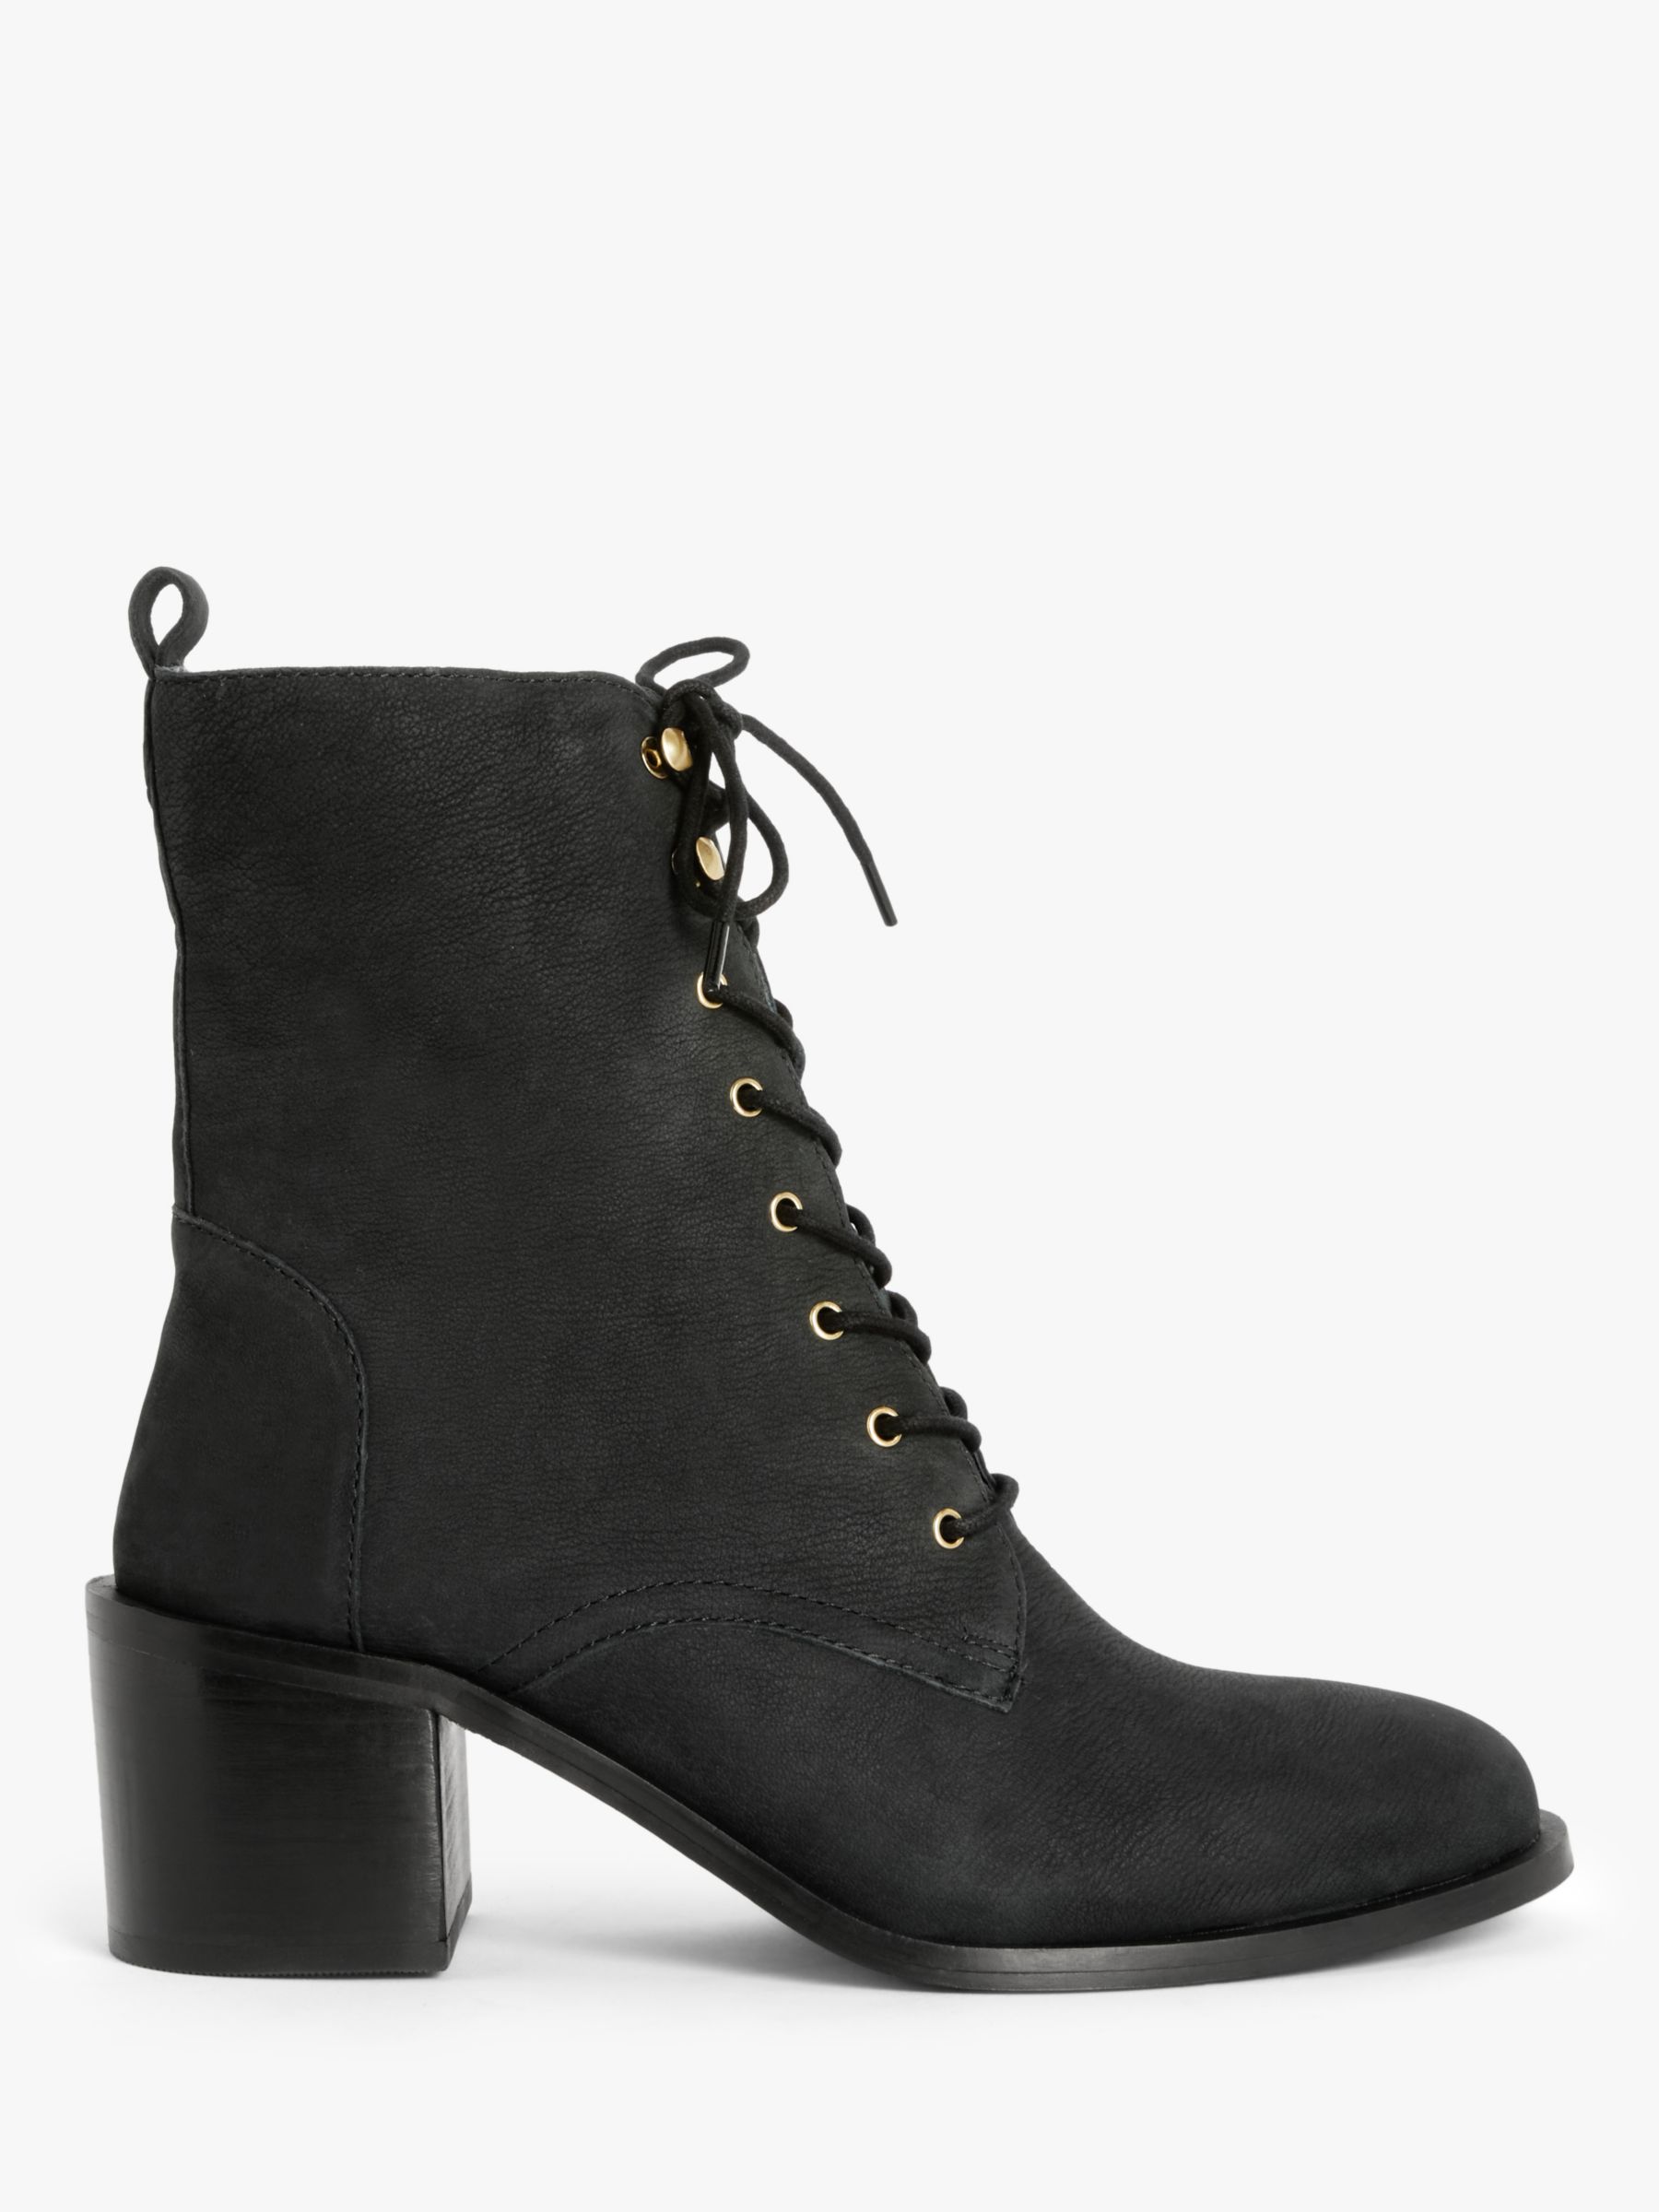 John Lewis Paignton Leather Lace Up Heel Ankle Boots, Black at John ...